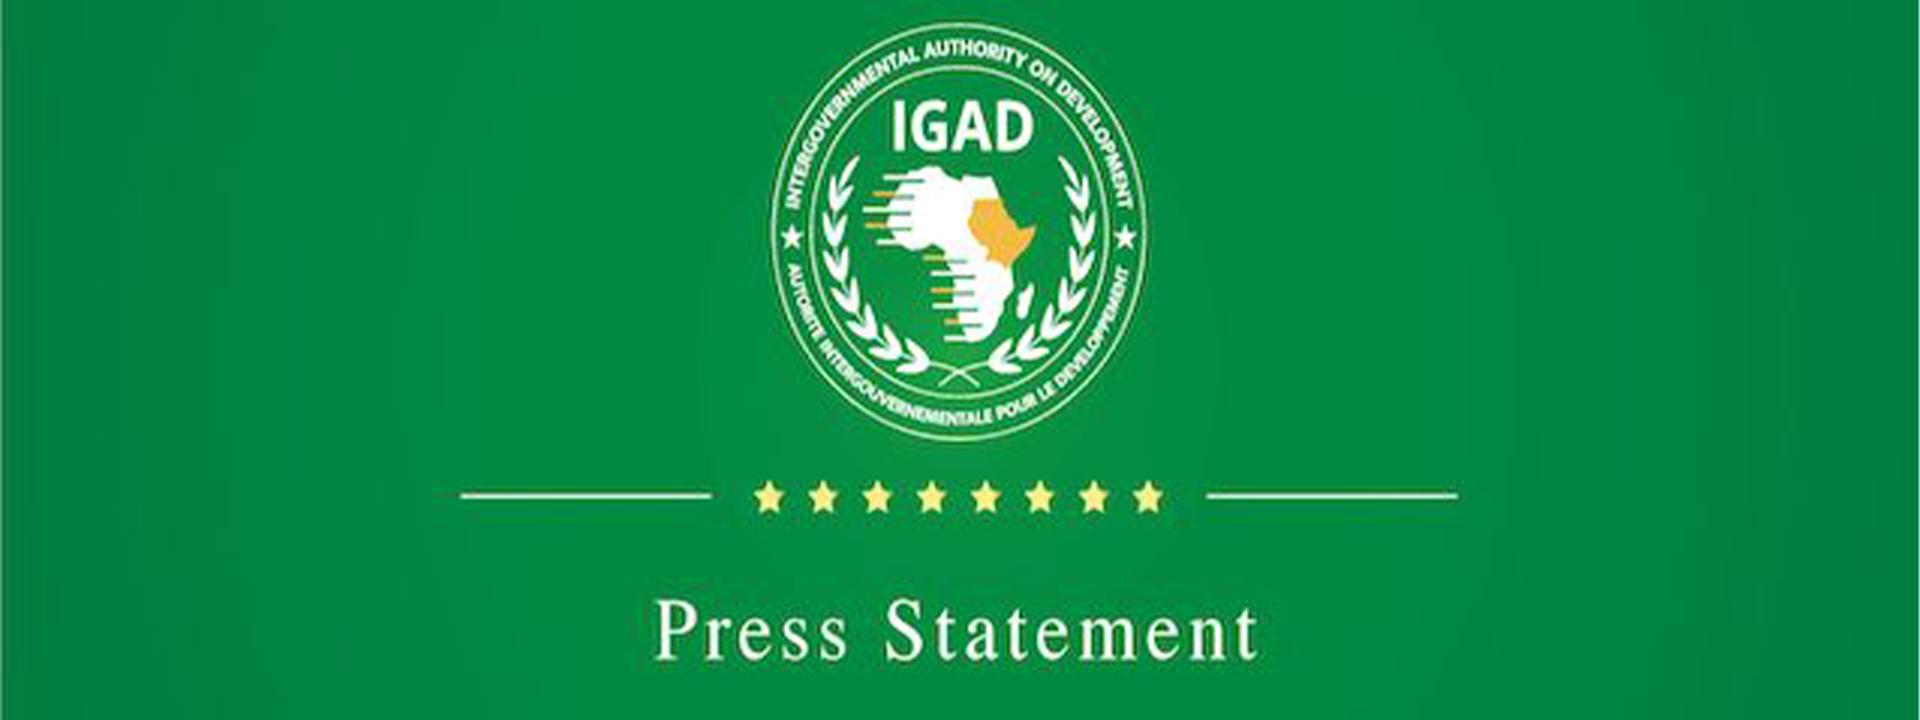 IGAD Commends Uganda for Successfully Containing Ebola Outbreak